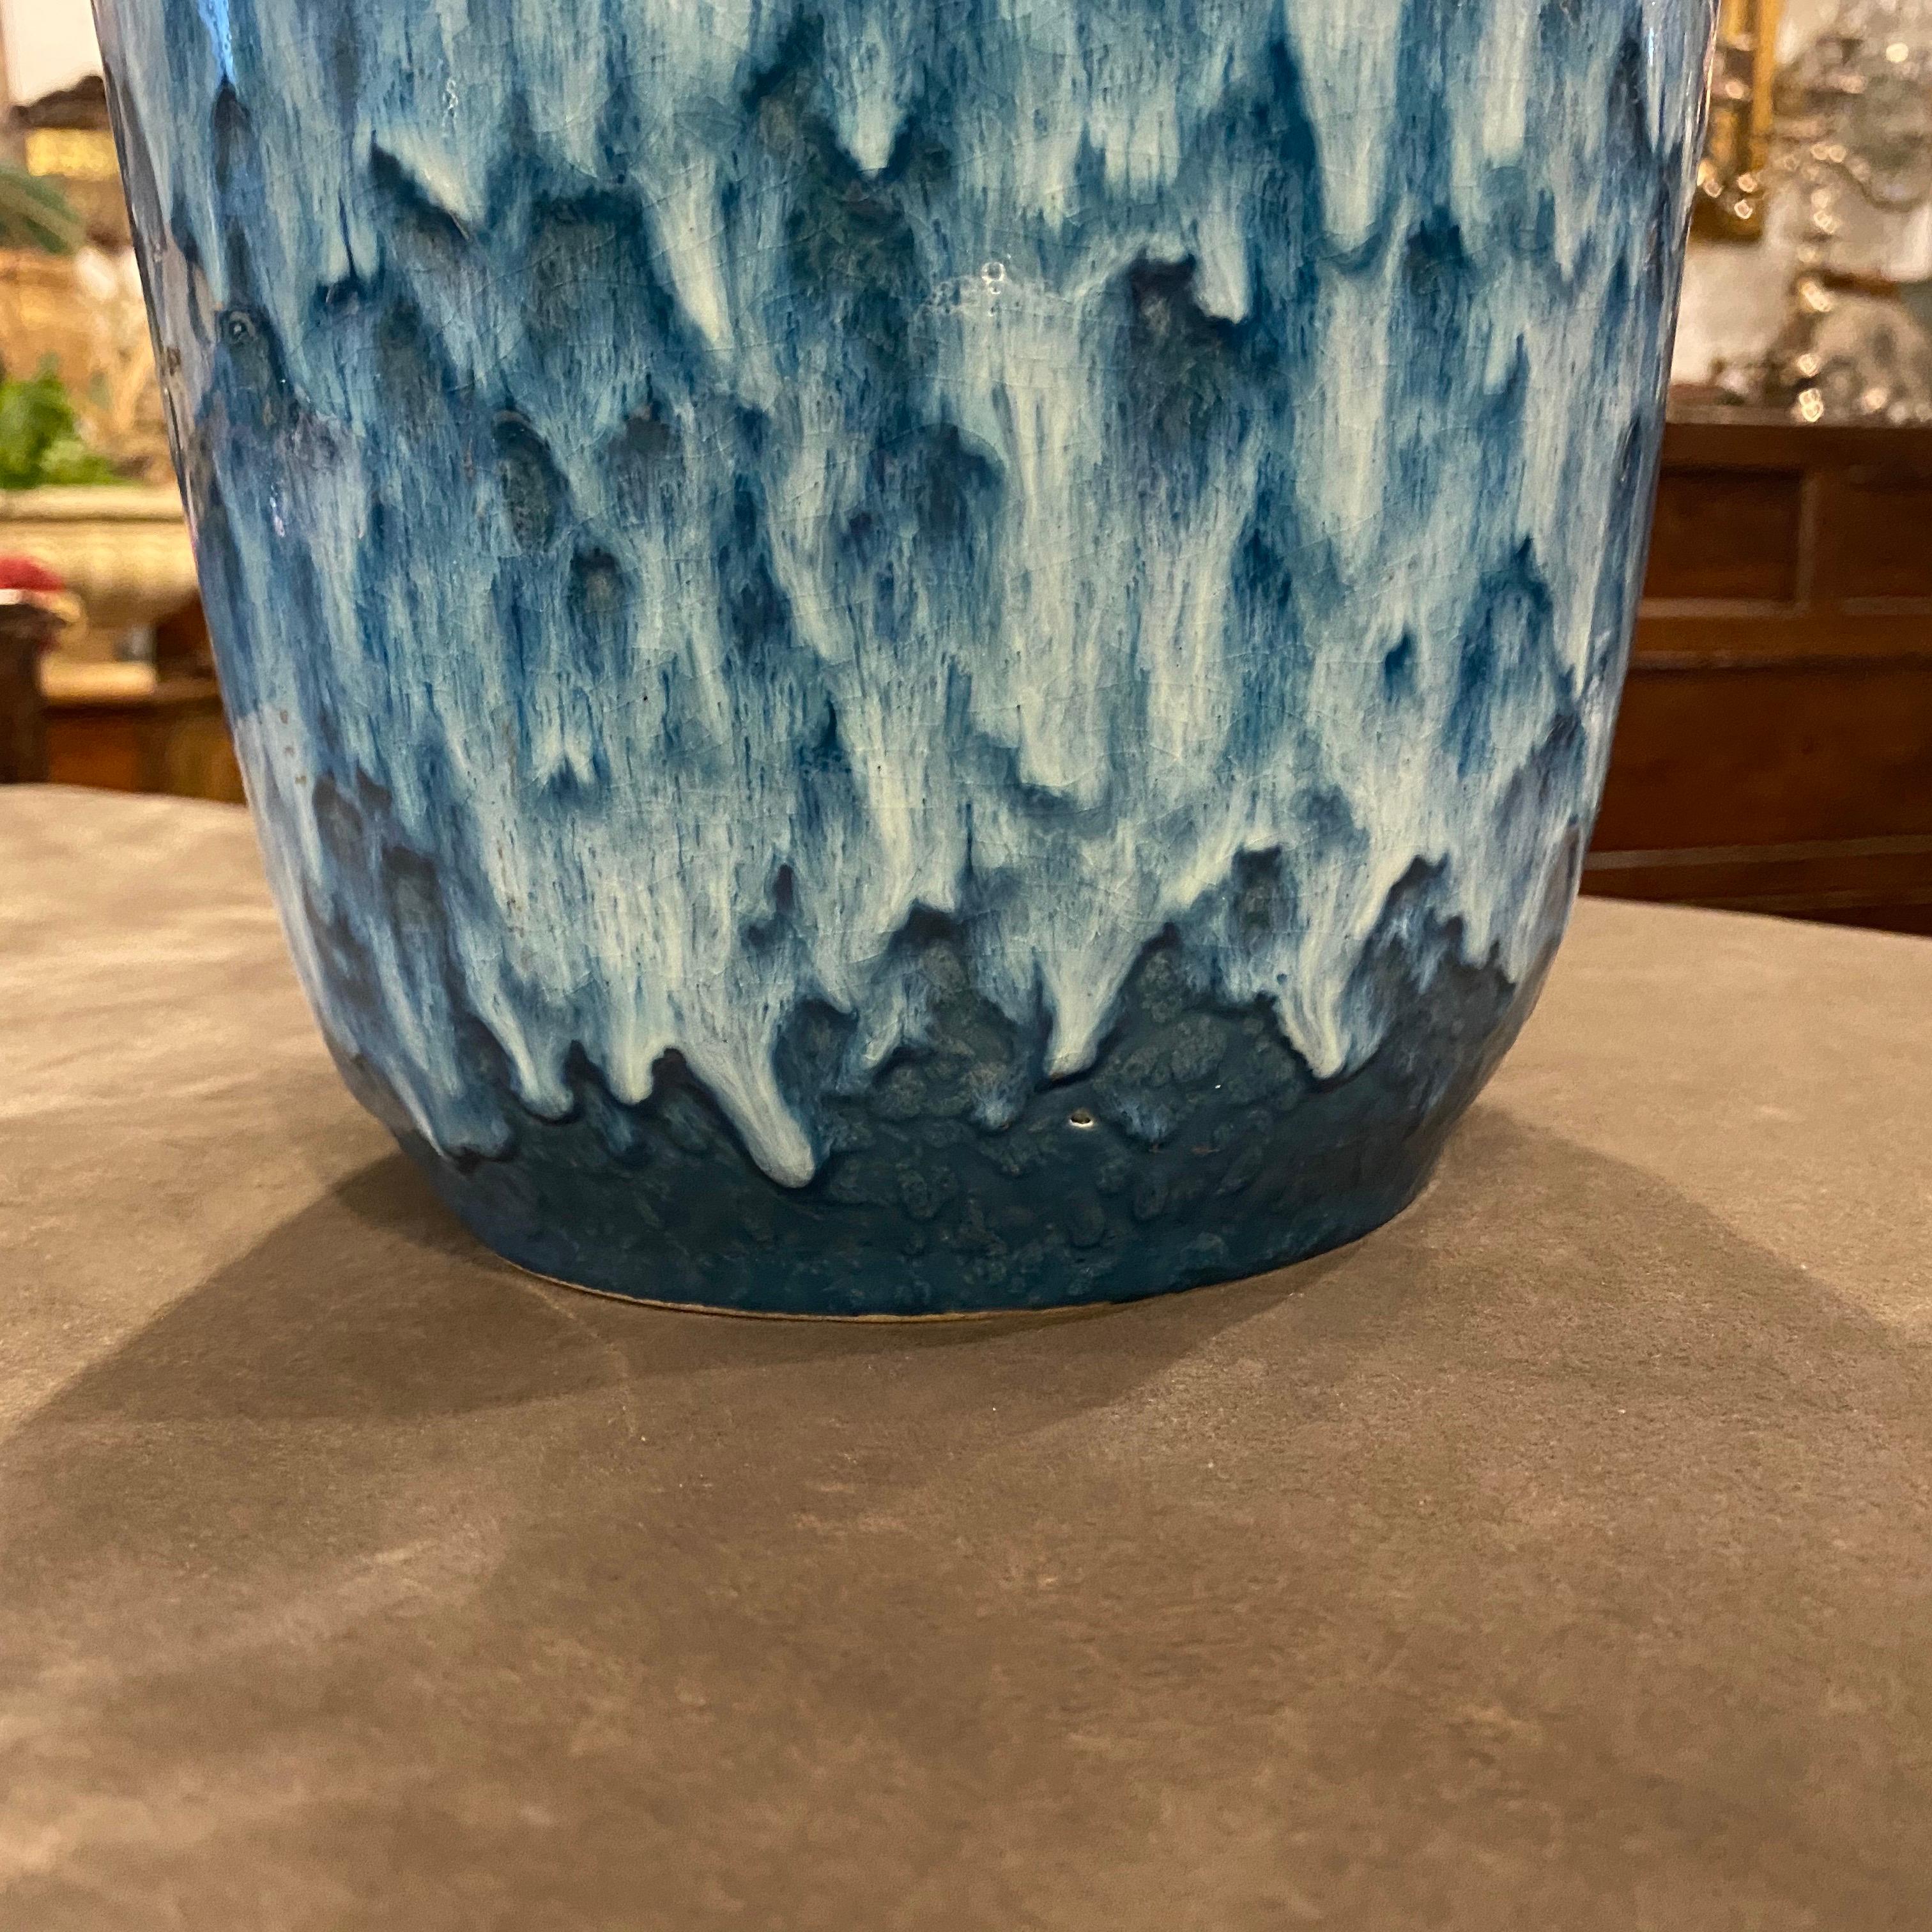 A big blue ceramic vase by German manufacturer Scheurich, made in Germany in the 1970s in perfect conditions. It's marked on the bottom West Germany.